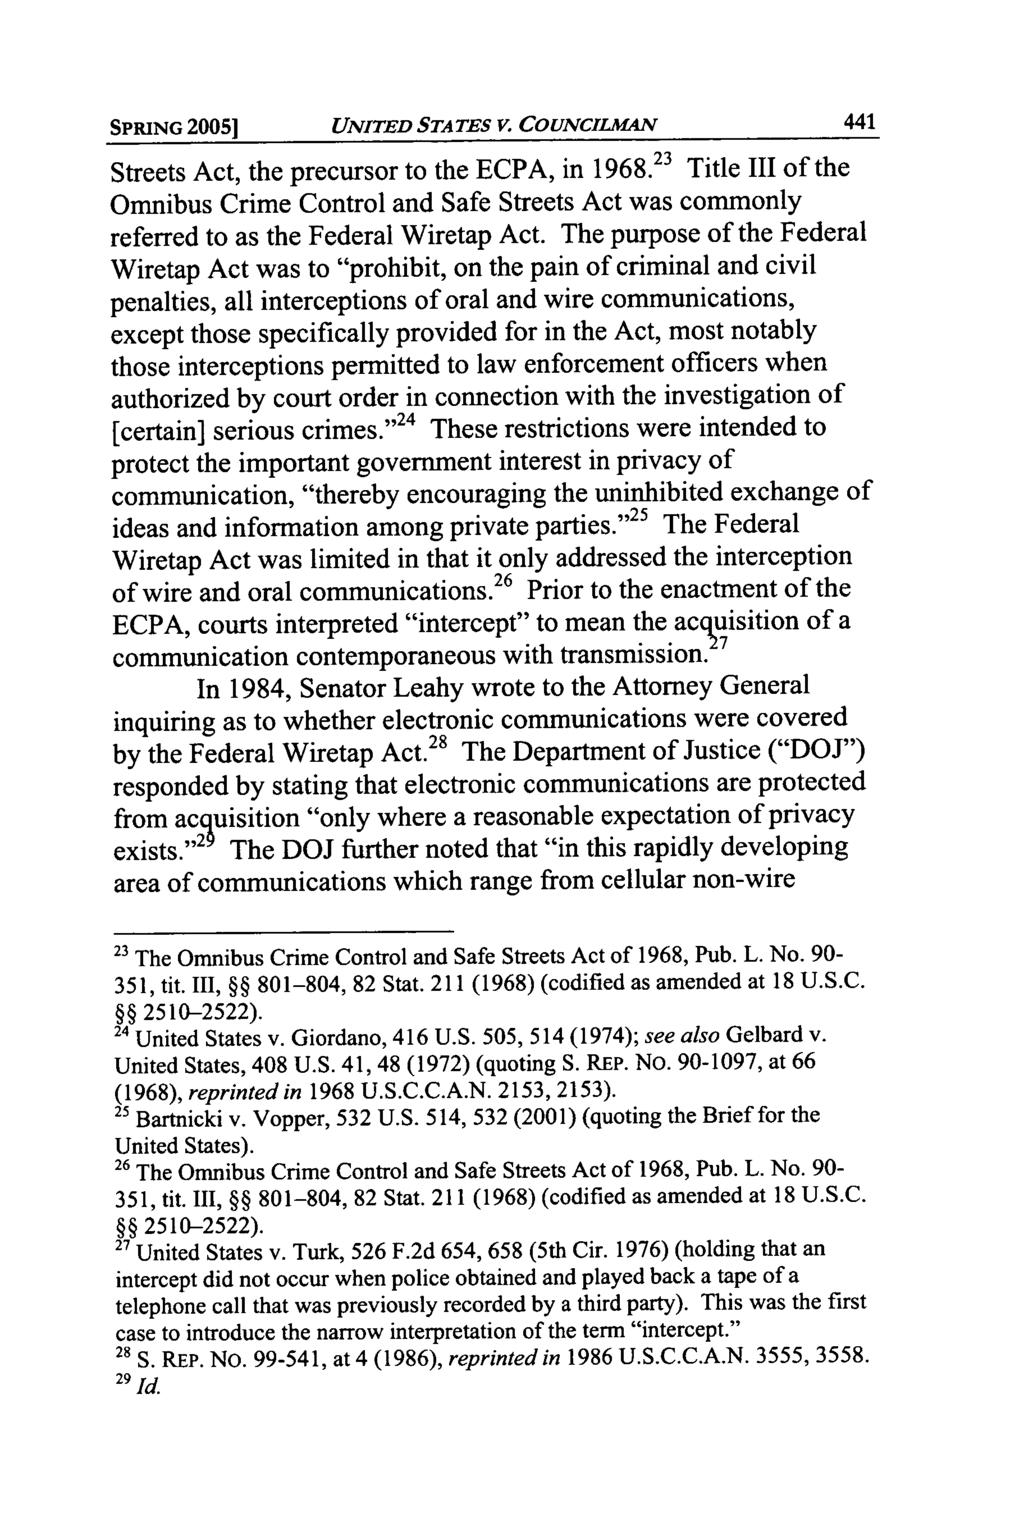 SPRING 20051 Streets Act, the precursor to the ECPA, in 1968.23 Title III of the Omnibus Crime Control and Safe Streets Act was commonly referred to as the Federal Wiretap Act.